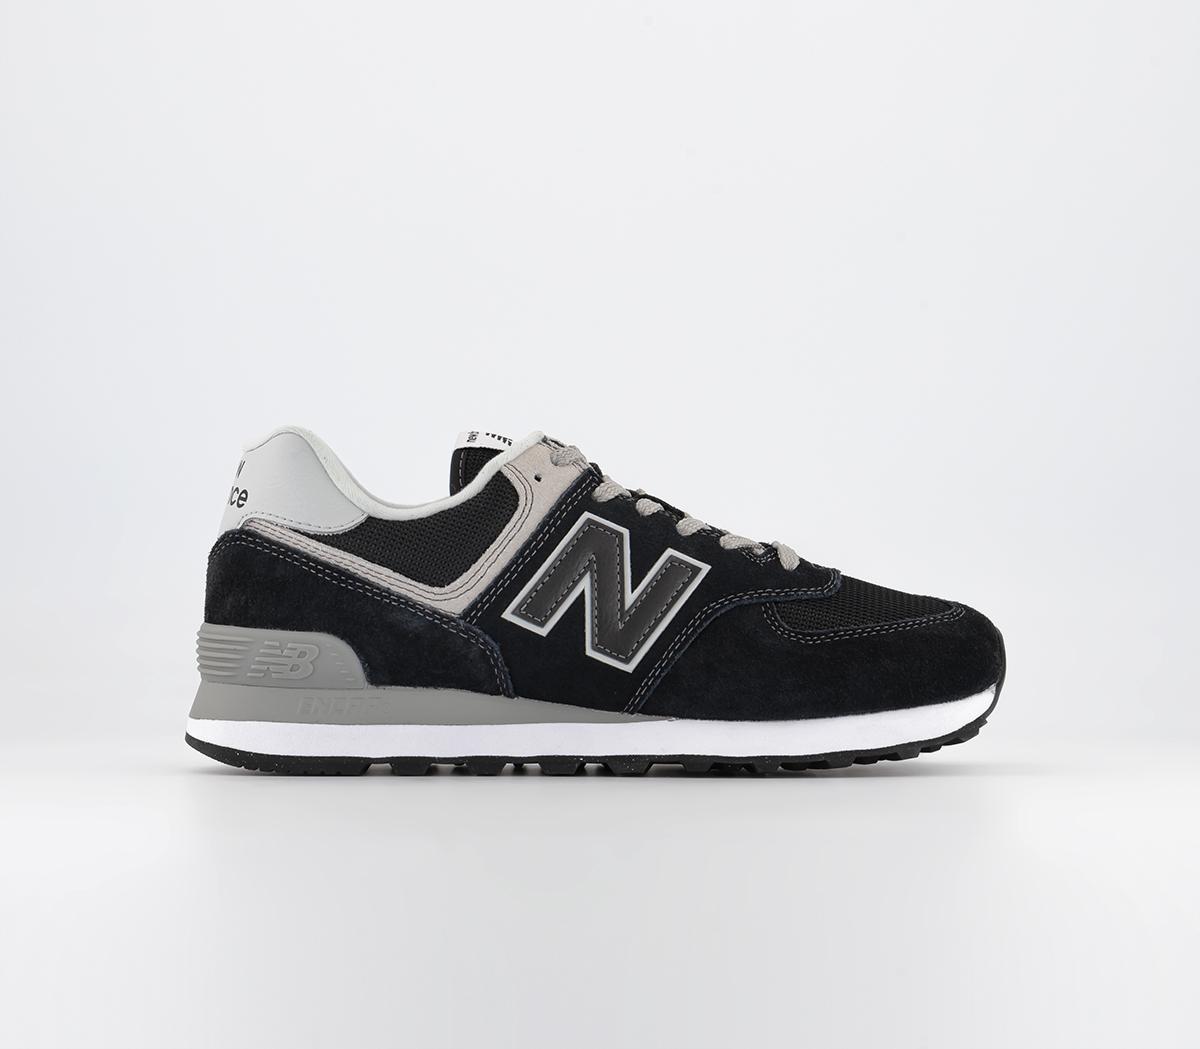 New Balance 574 Trainers Black Grey White Green Leaf - Men's Trainers